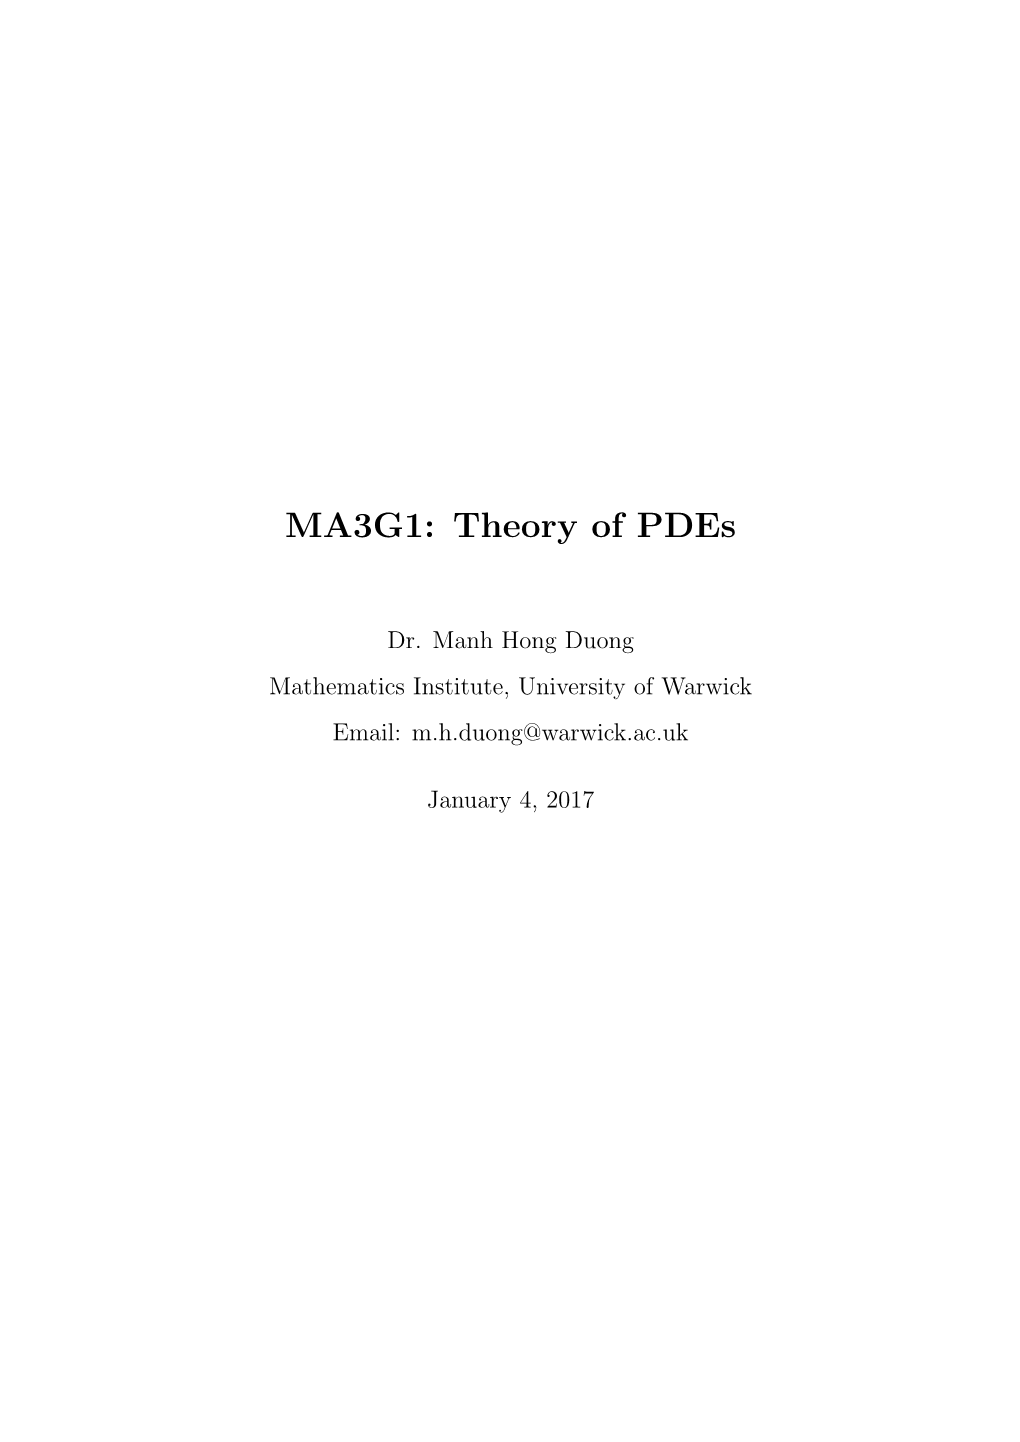 MA3G1: Theory of Pdes